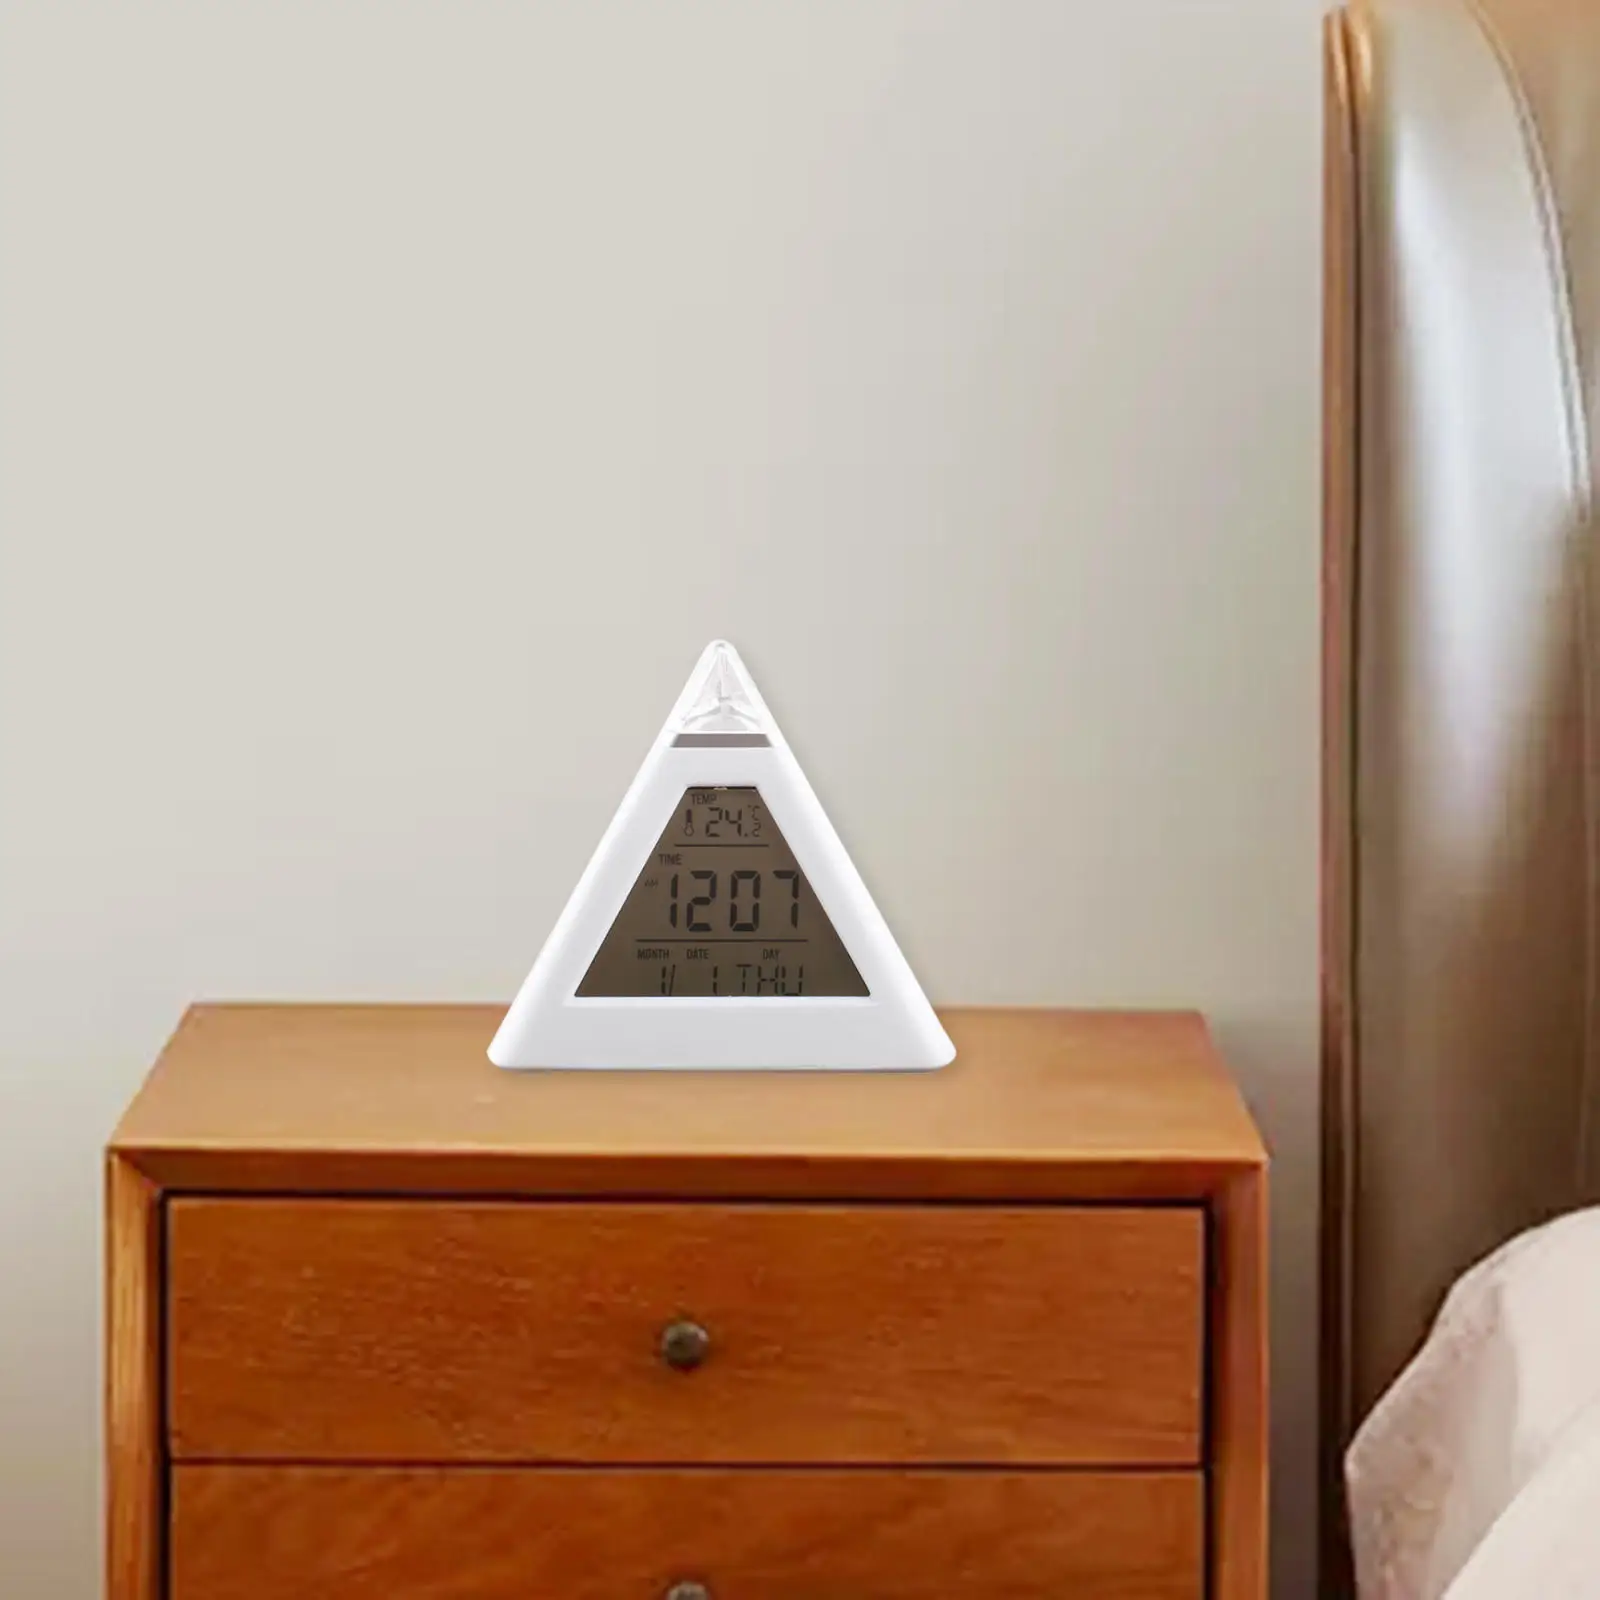 Digital Triangle Alarm Clock Decor Snooze Function Calendar Temperature Time Week Table Clock for Home Room